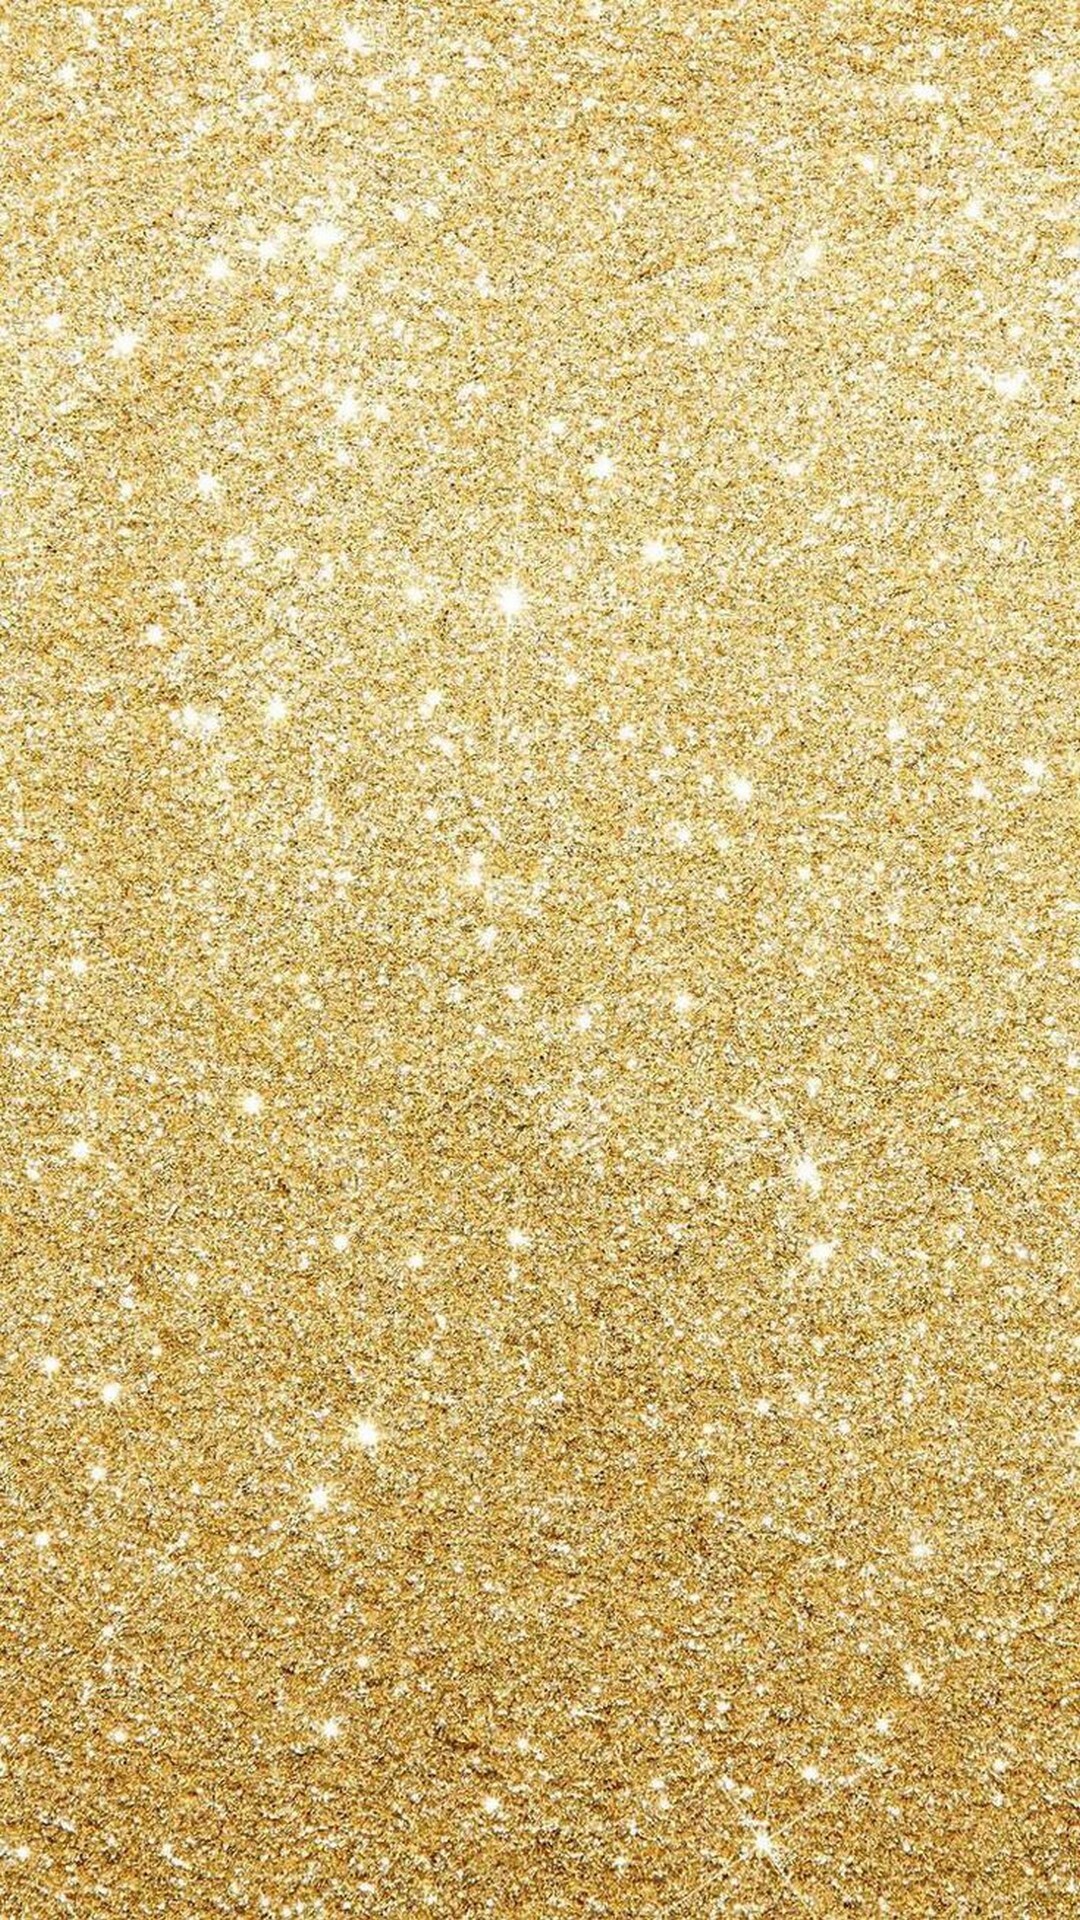 Gold Sparkle: Super fine particles, Gold glitter powder, Shining brightly with little flashes of light. 1080x1920 Full HD Wallpaper.